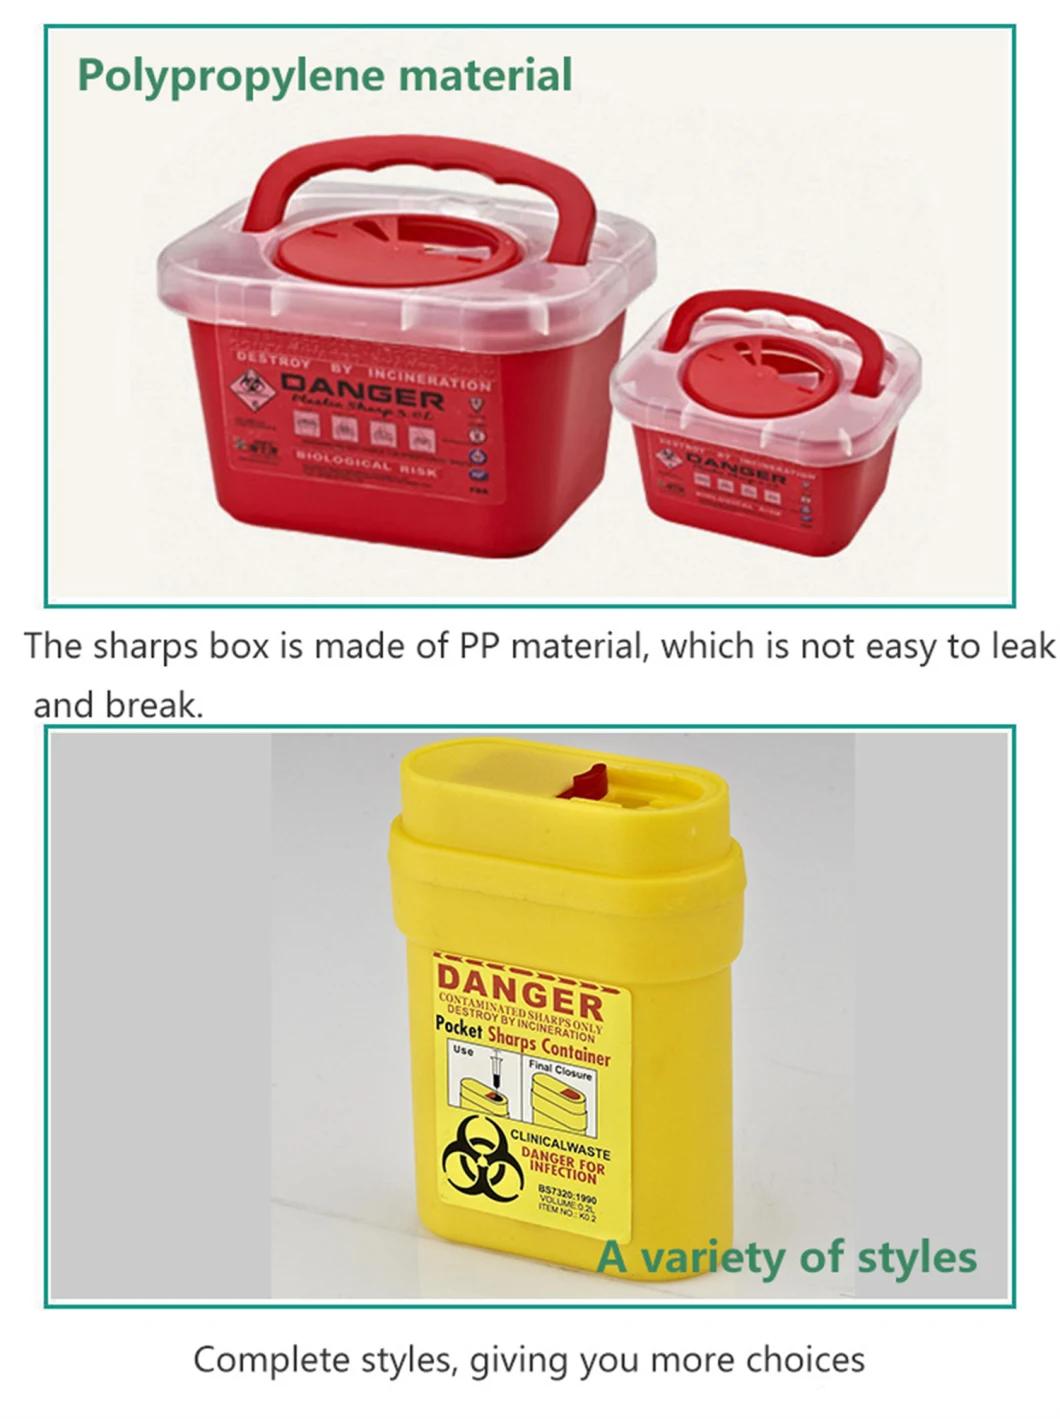 Sharps Container Small Disposal Needle Plastic Medicalwaste Bins Tattoo Accessories Yellow